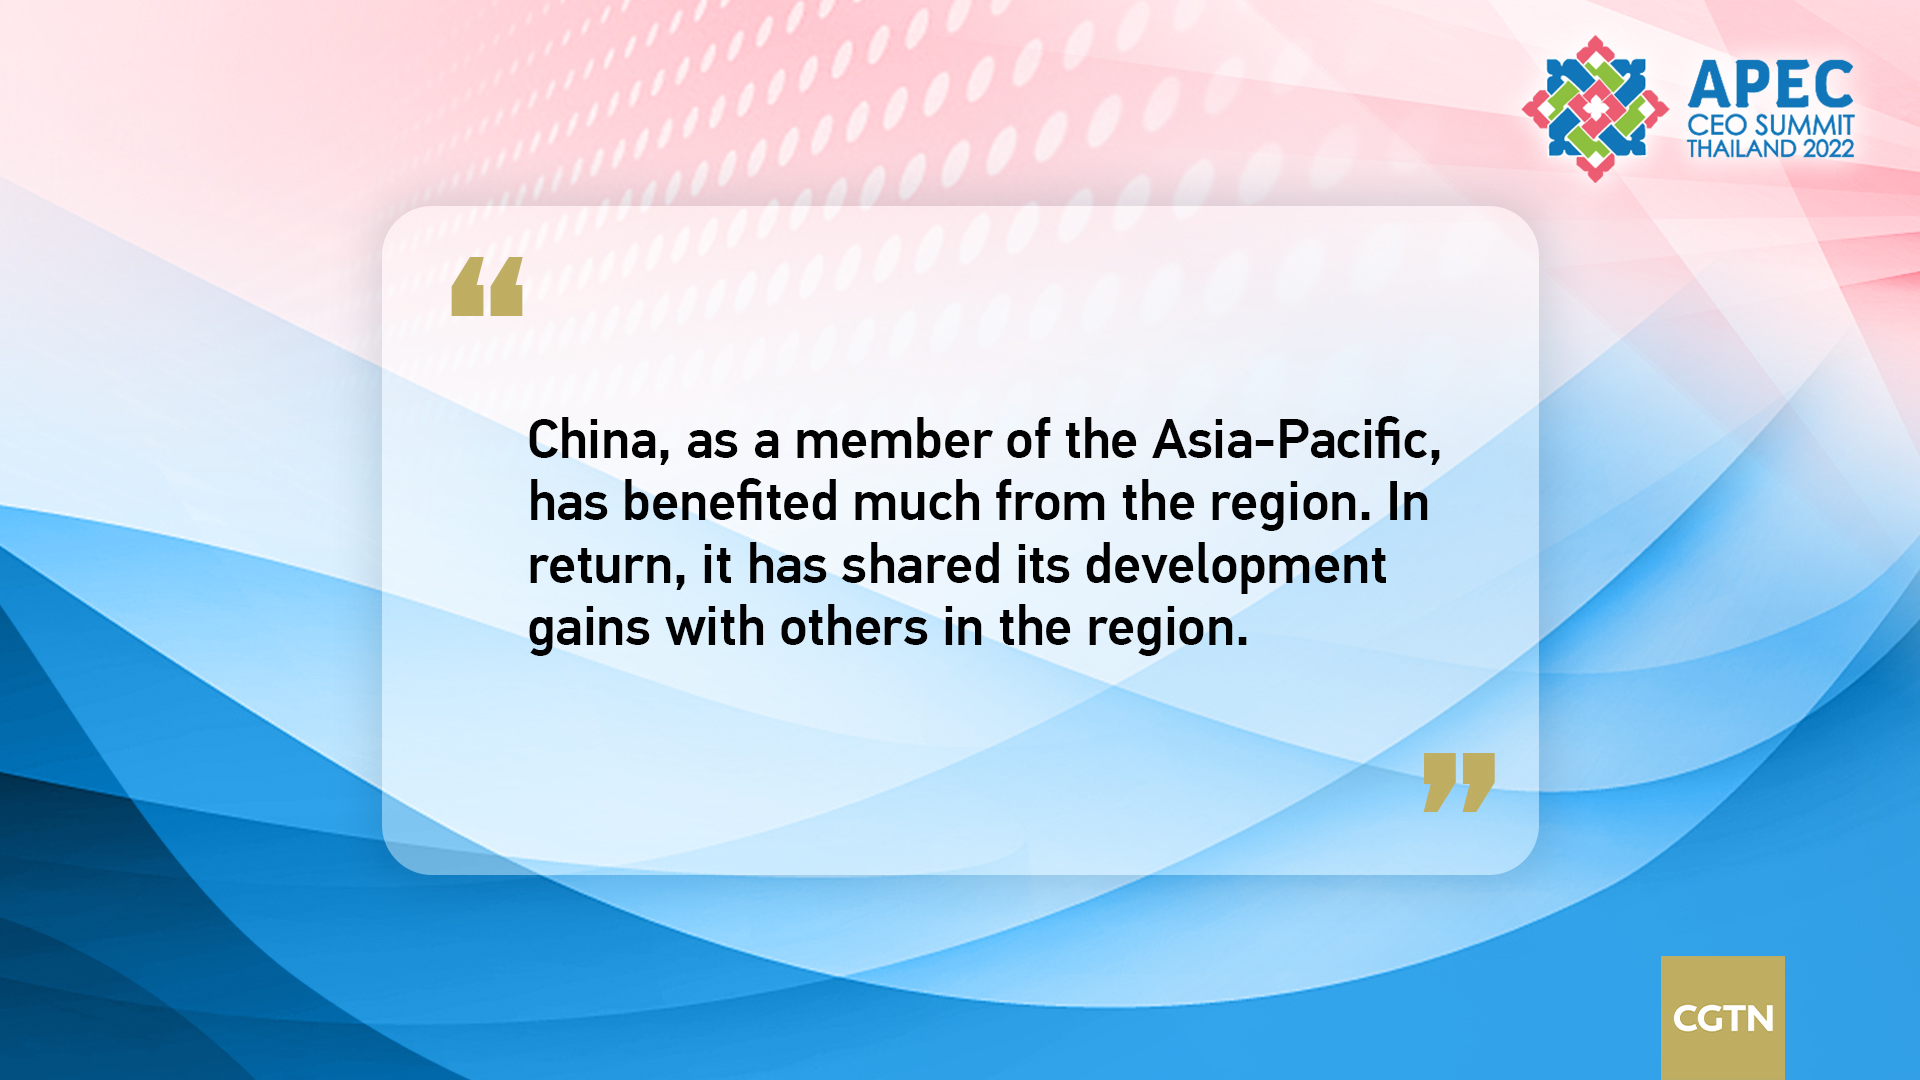 Key quotes from Xi Jinping's speech at APEC CEO Summit